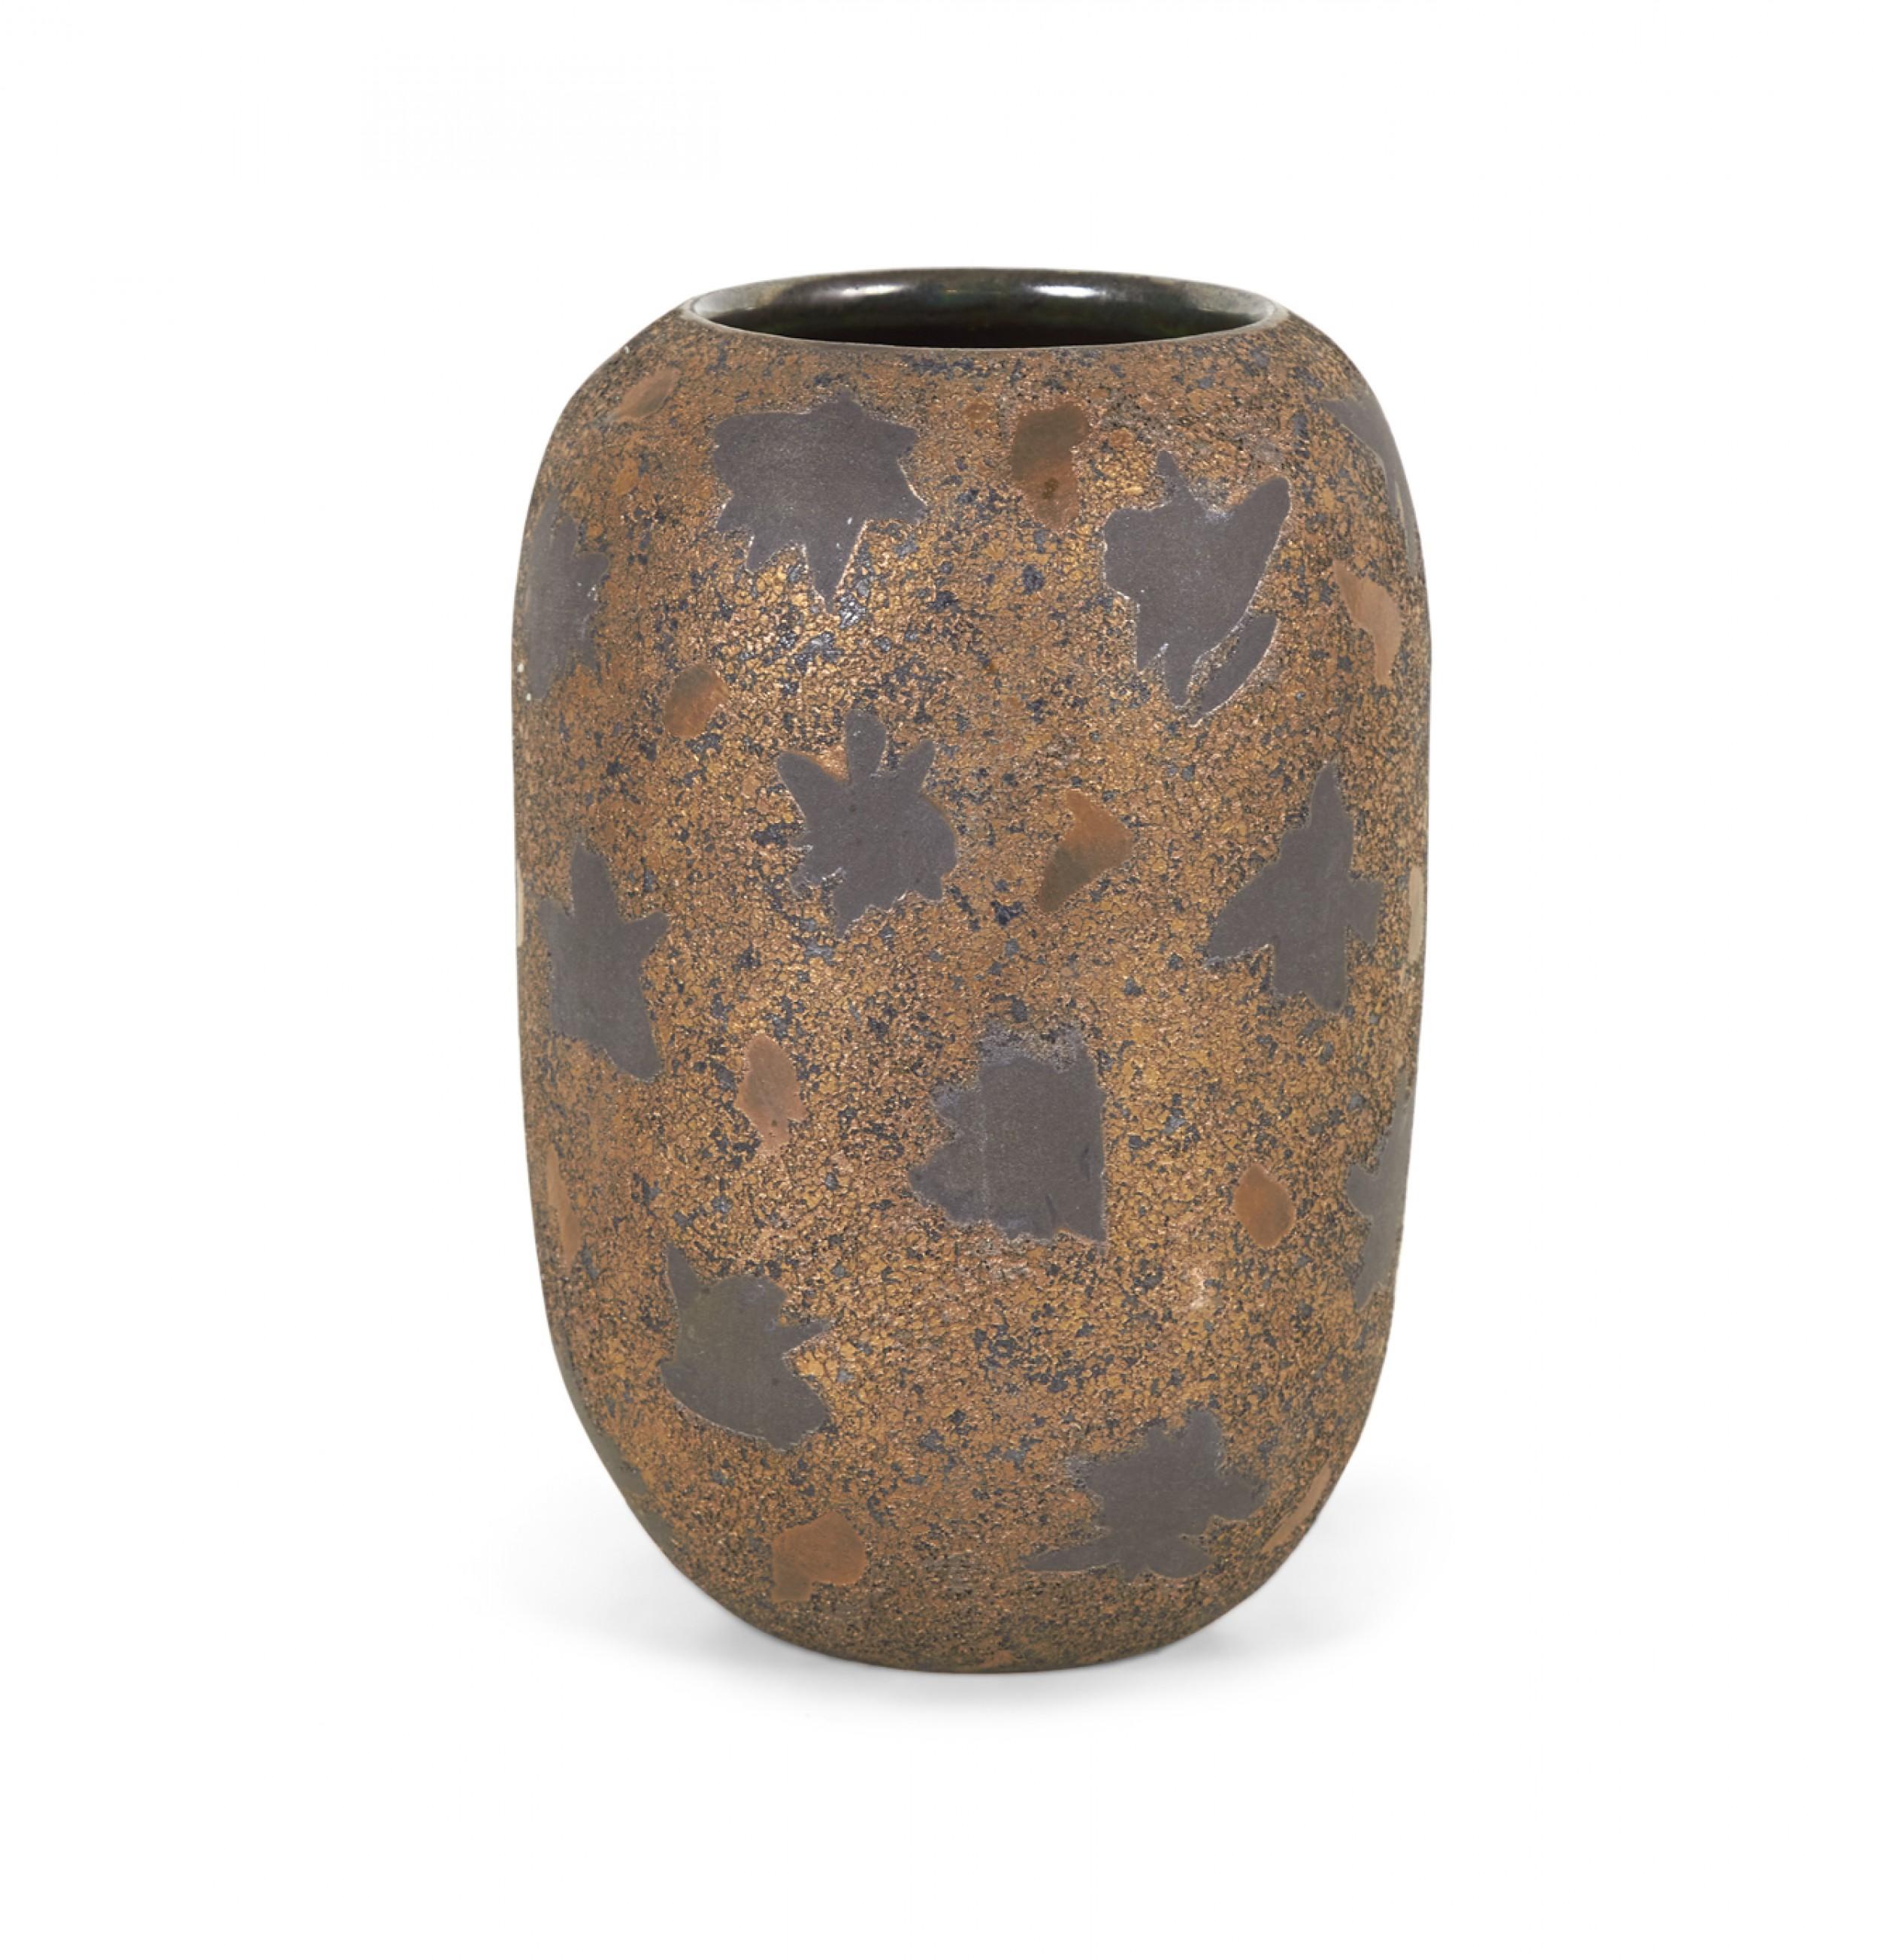 Contemporary thrown clay vase with a cylindrical form with a rounded lip and circular opening, and a black starburst pattern against a bronze and black textured glaze. (GARY DIPASQUALE).